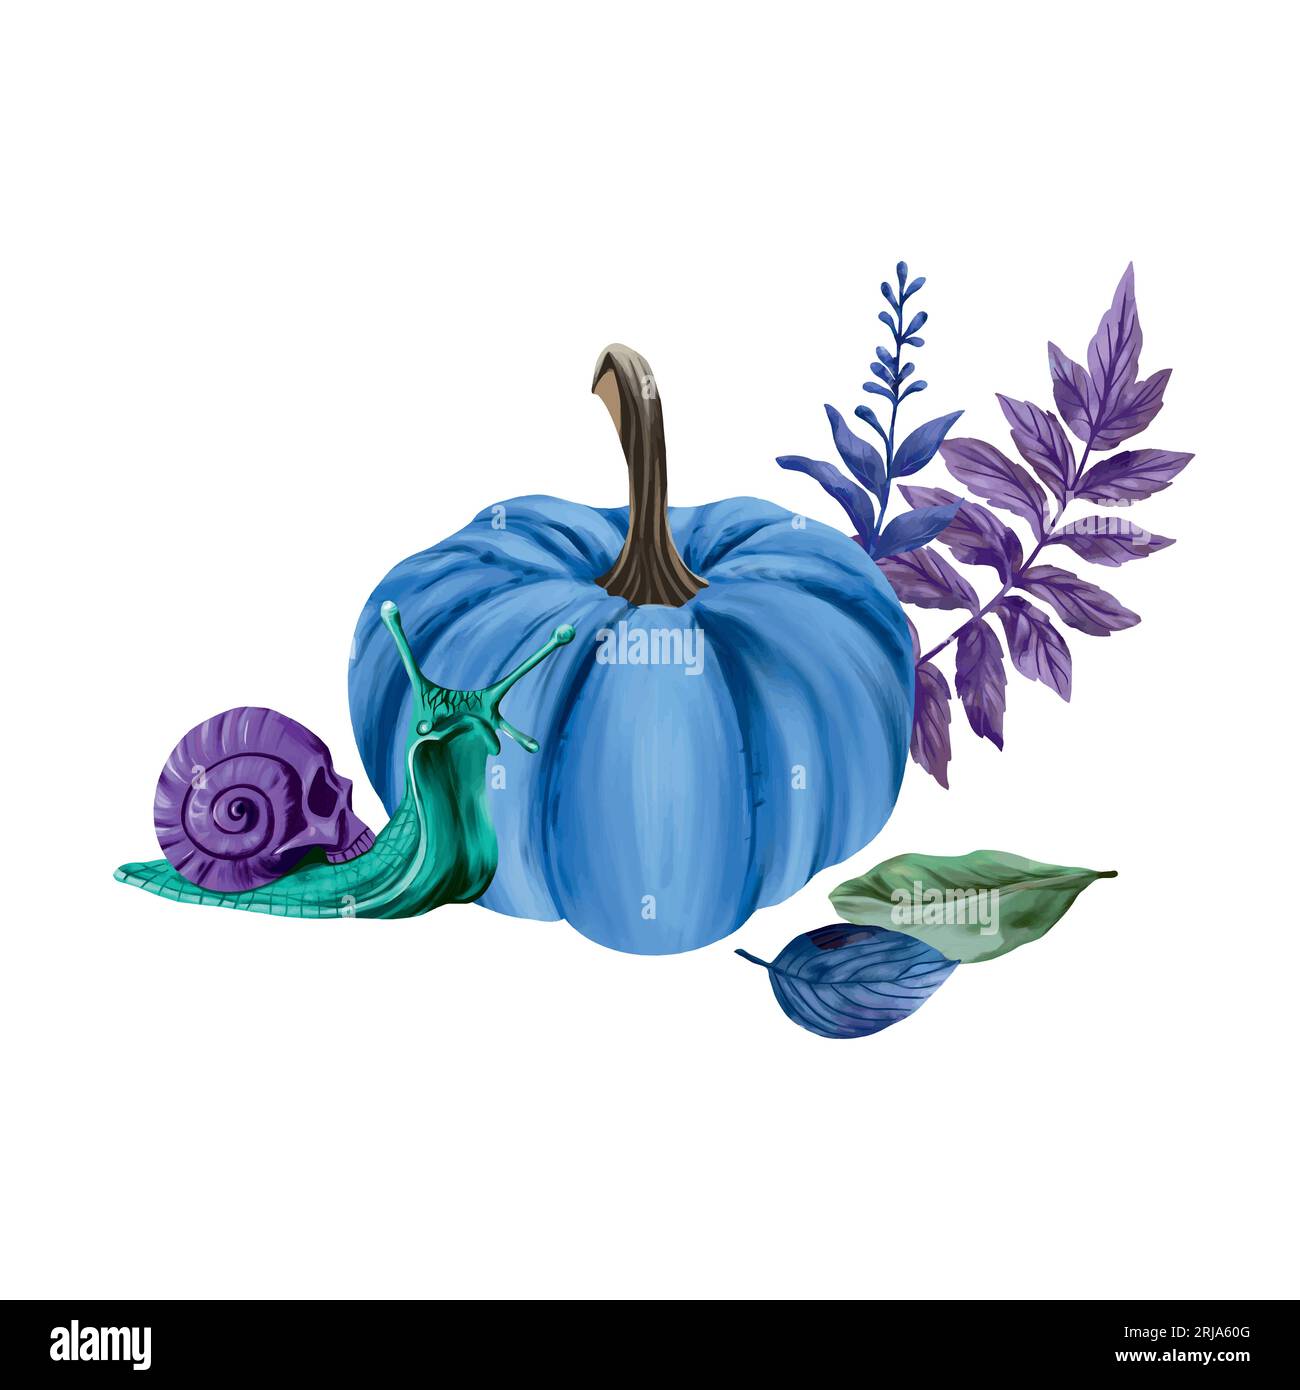 Pumpkin, snail and leaves. Vector illustration for esoteric and halloween. Design element for greeting cards, holiday banners, flyers, covers. Stock Vector